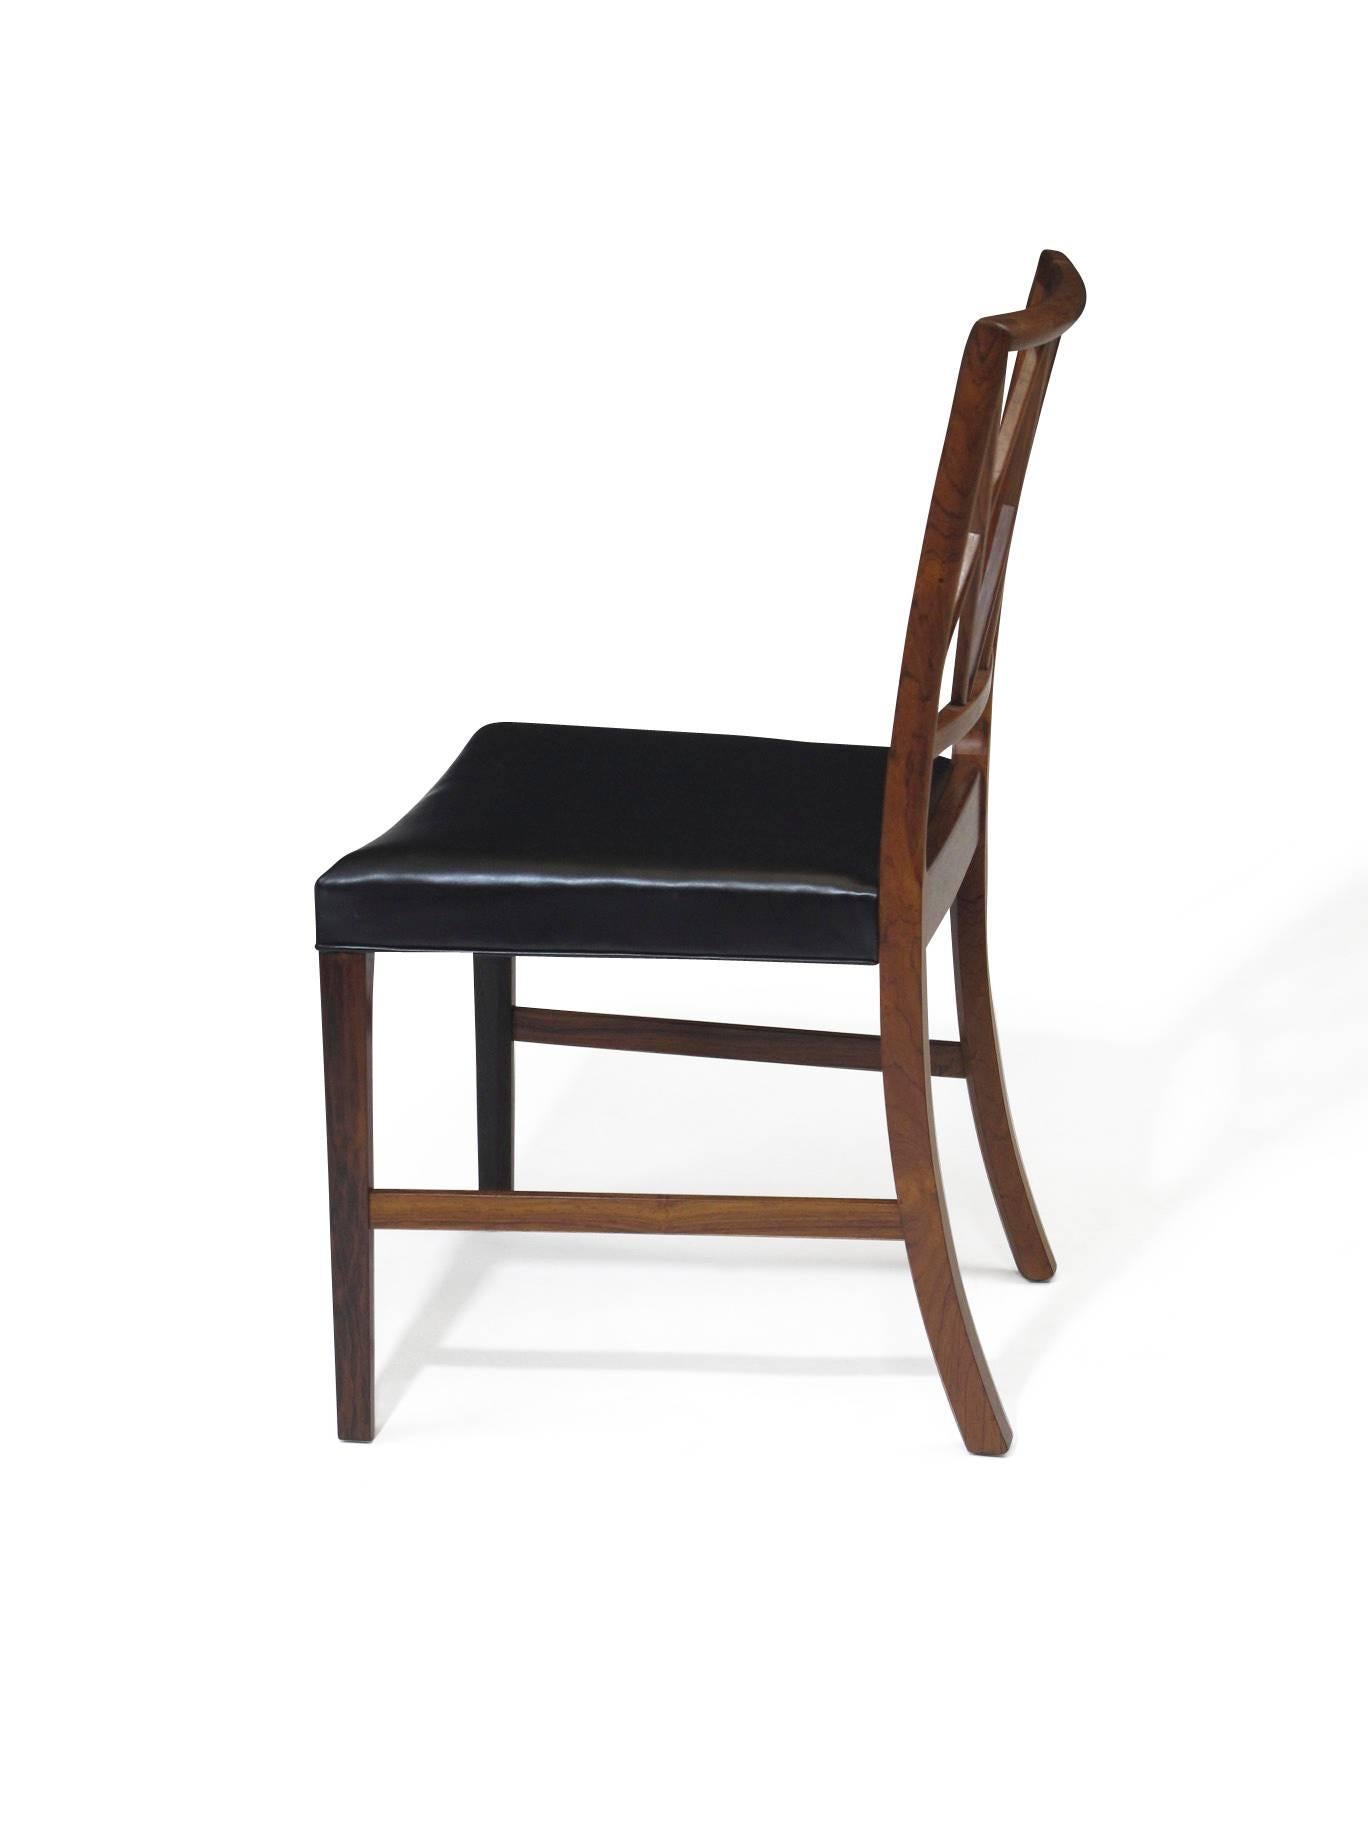 Oiled Ole Wanscher for AJ Iversen Rosewood Dining Chairs For Sale